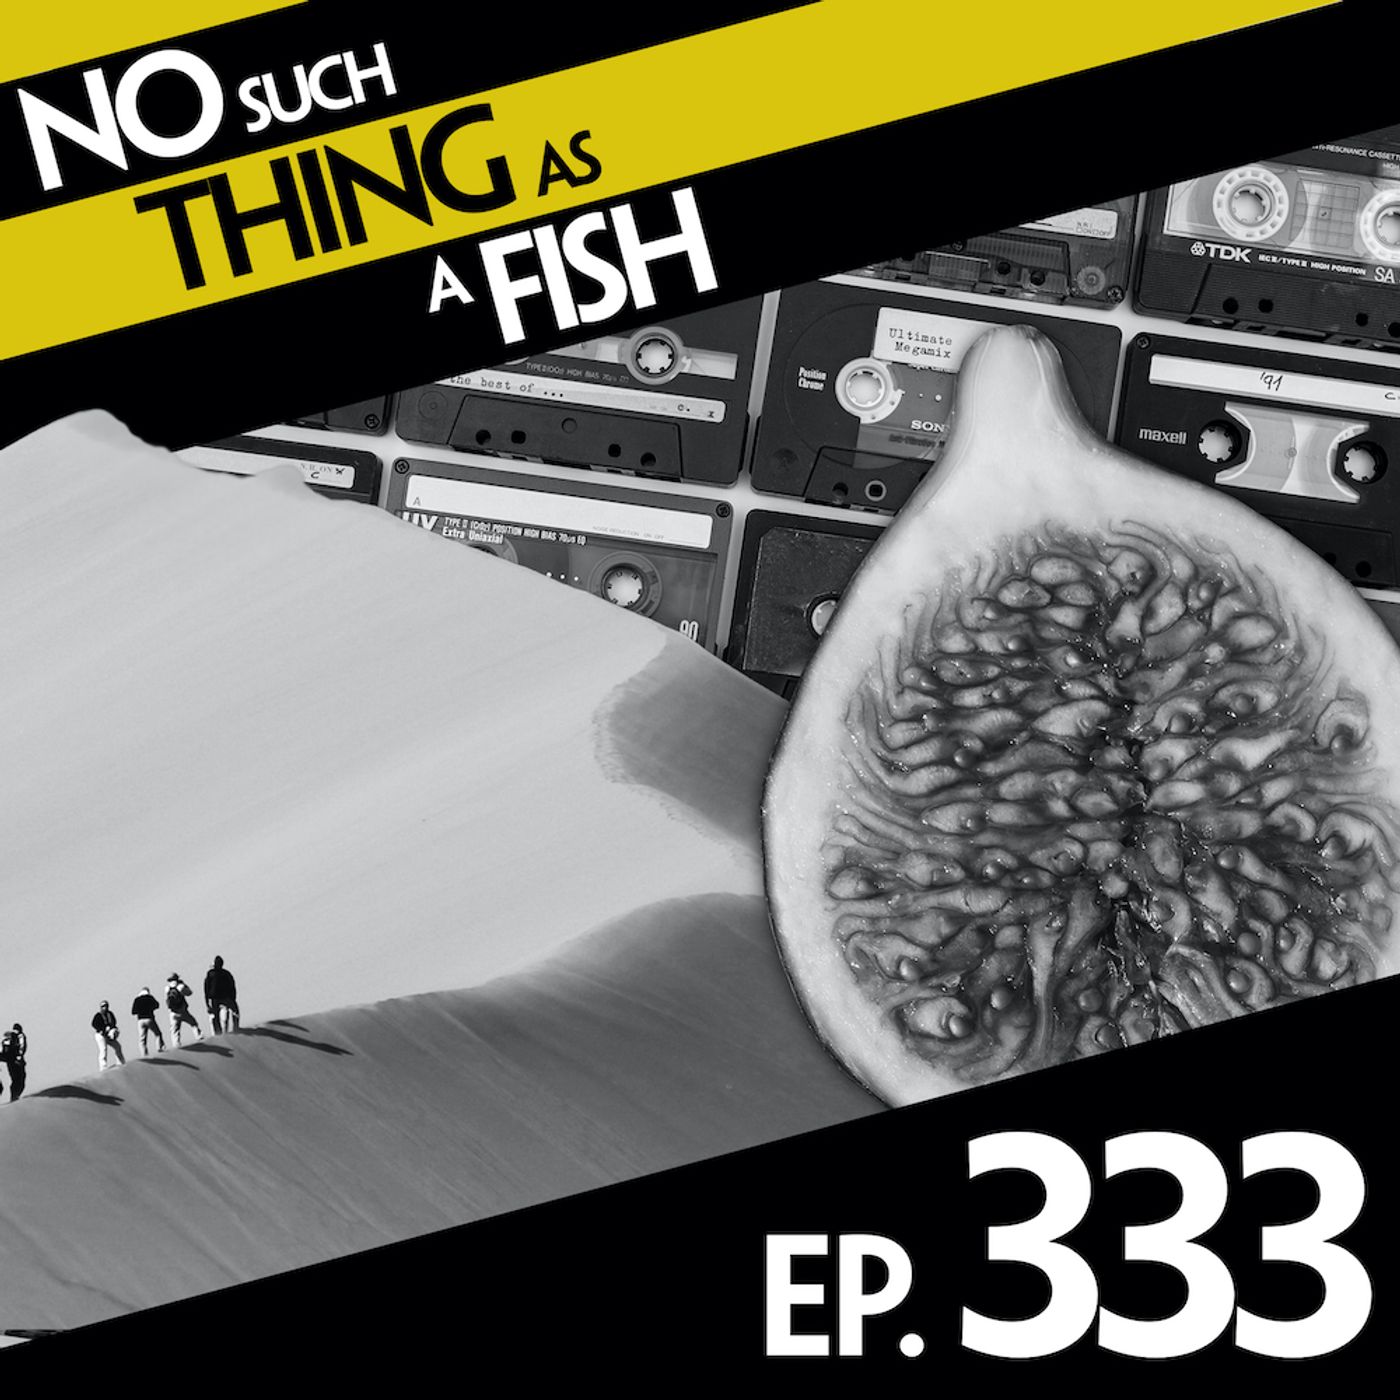 333: No Such Thing As Fingerprints On The Avocados